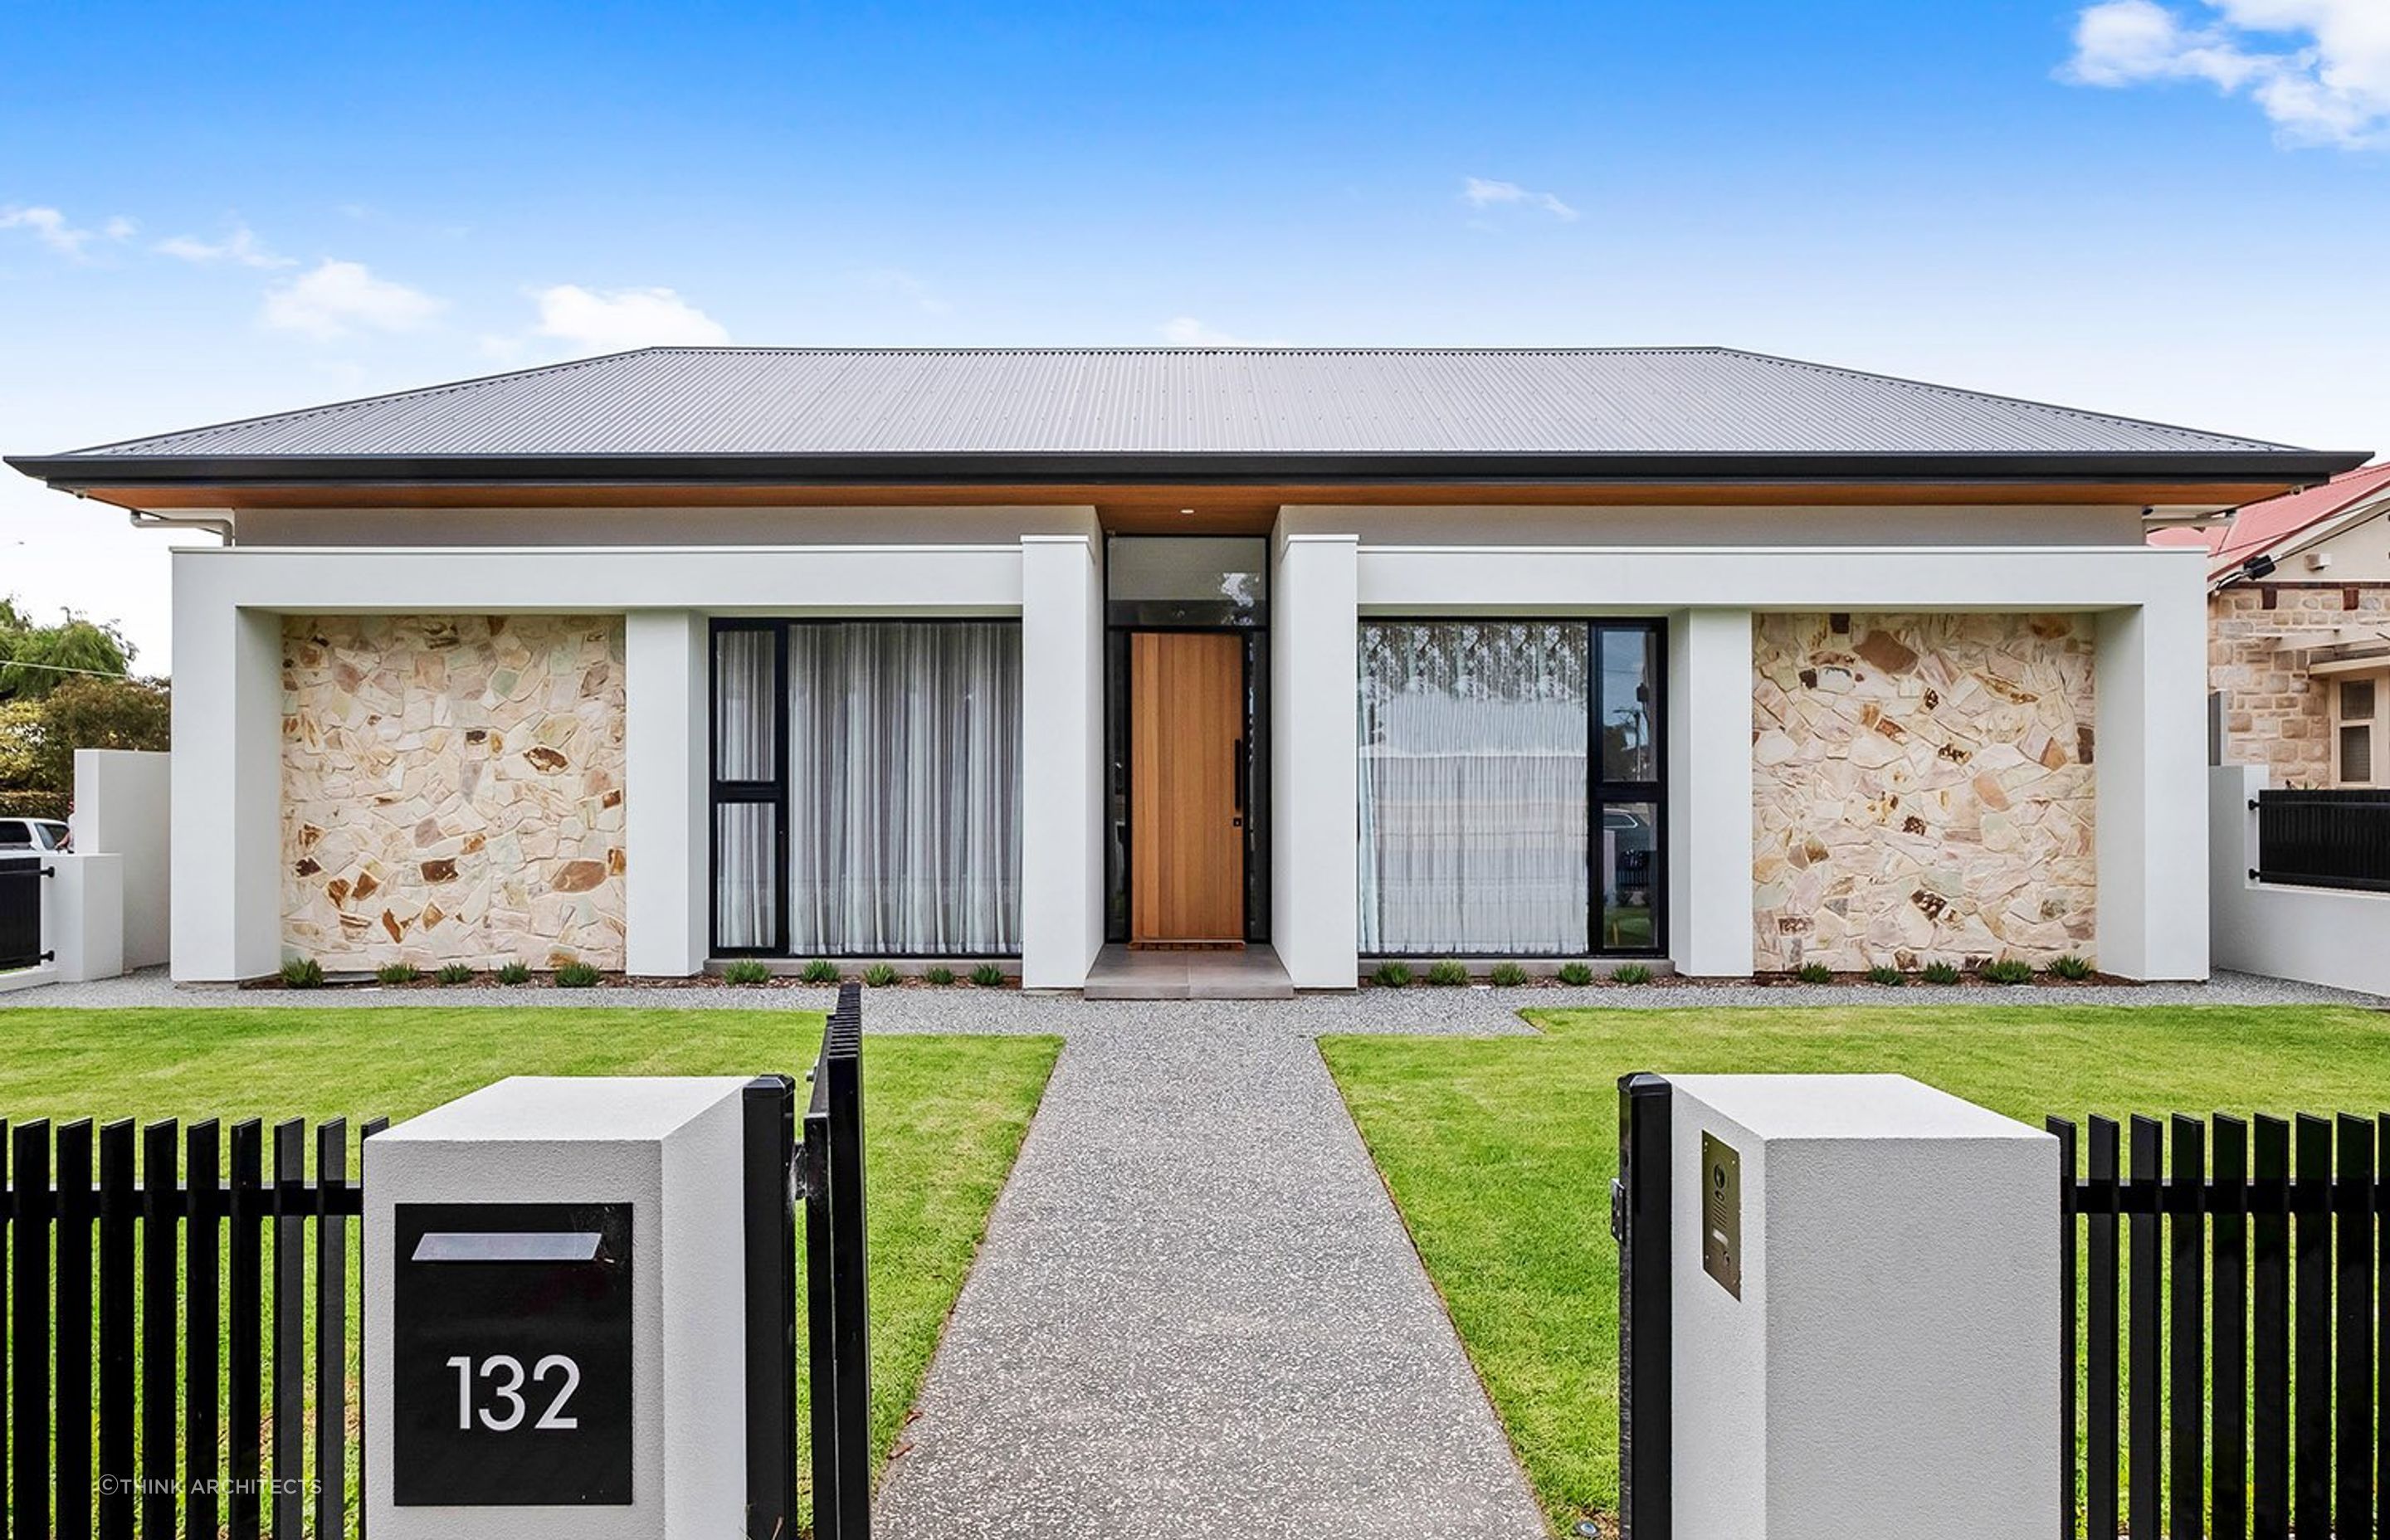 With the front door withdrawn more attention is given to the supporting pillars, windows and stone cladding. Featured project: East Terrace Residence - Henley Beach by Think Architects